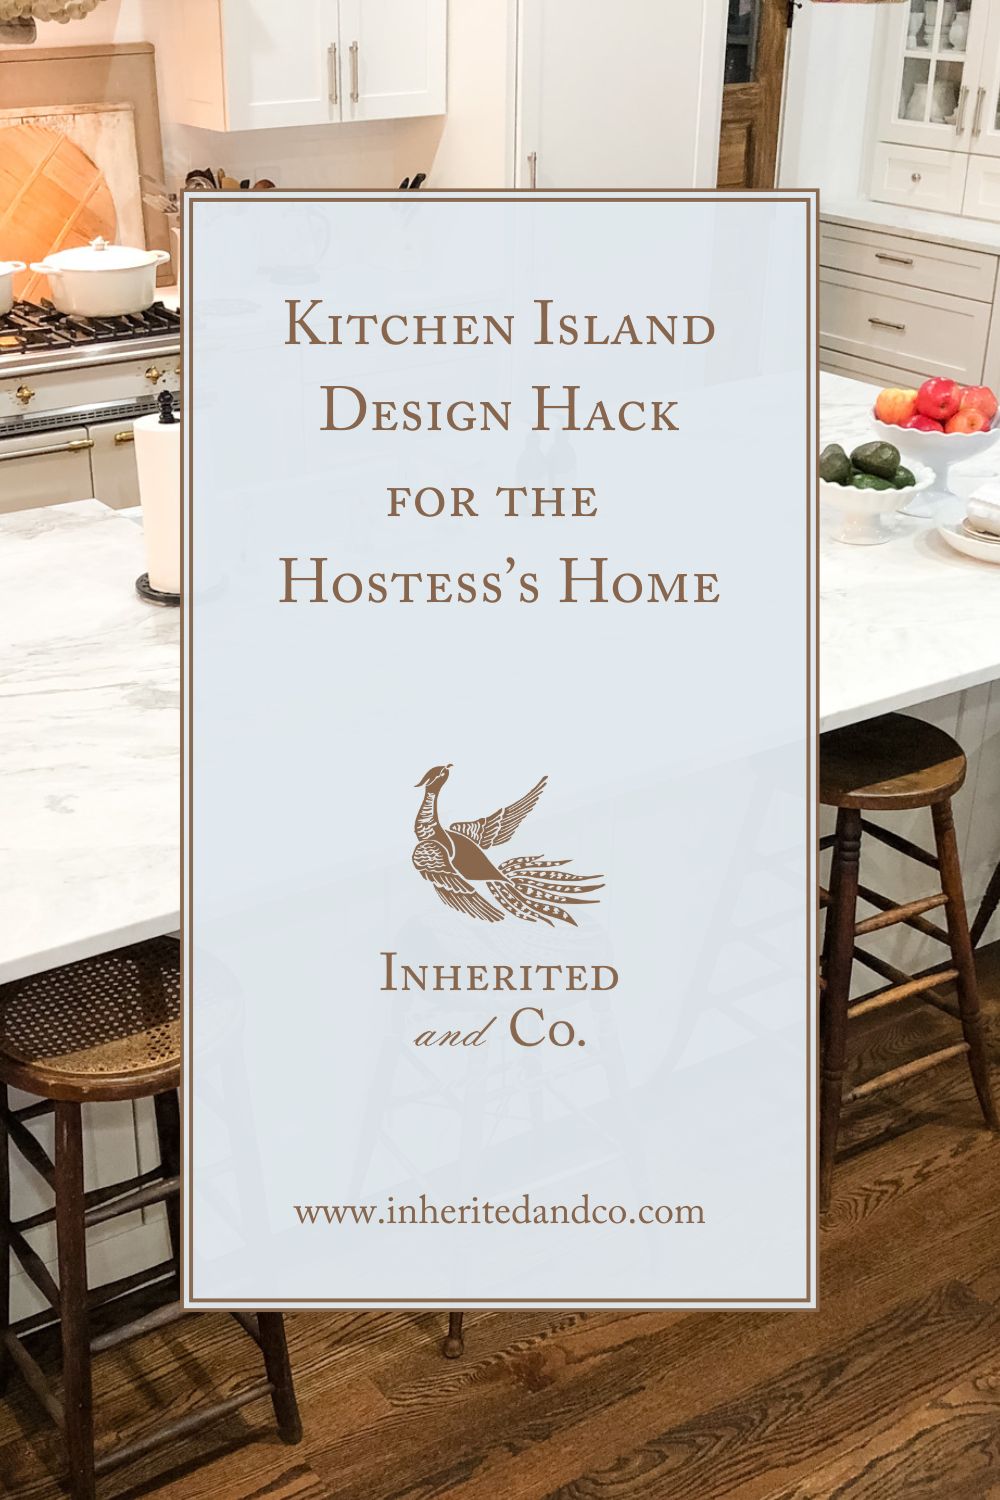 "Kitchen Island Design Hack for the Hostess's Home"